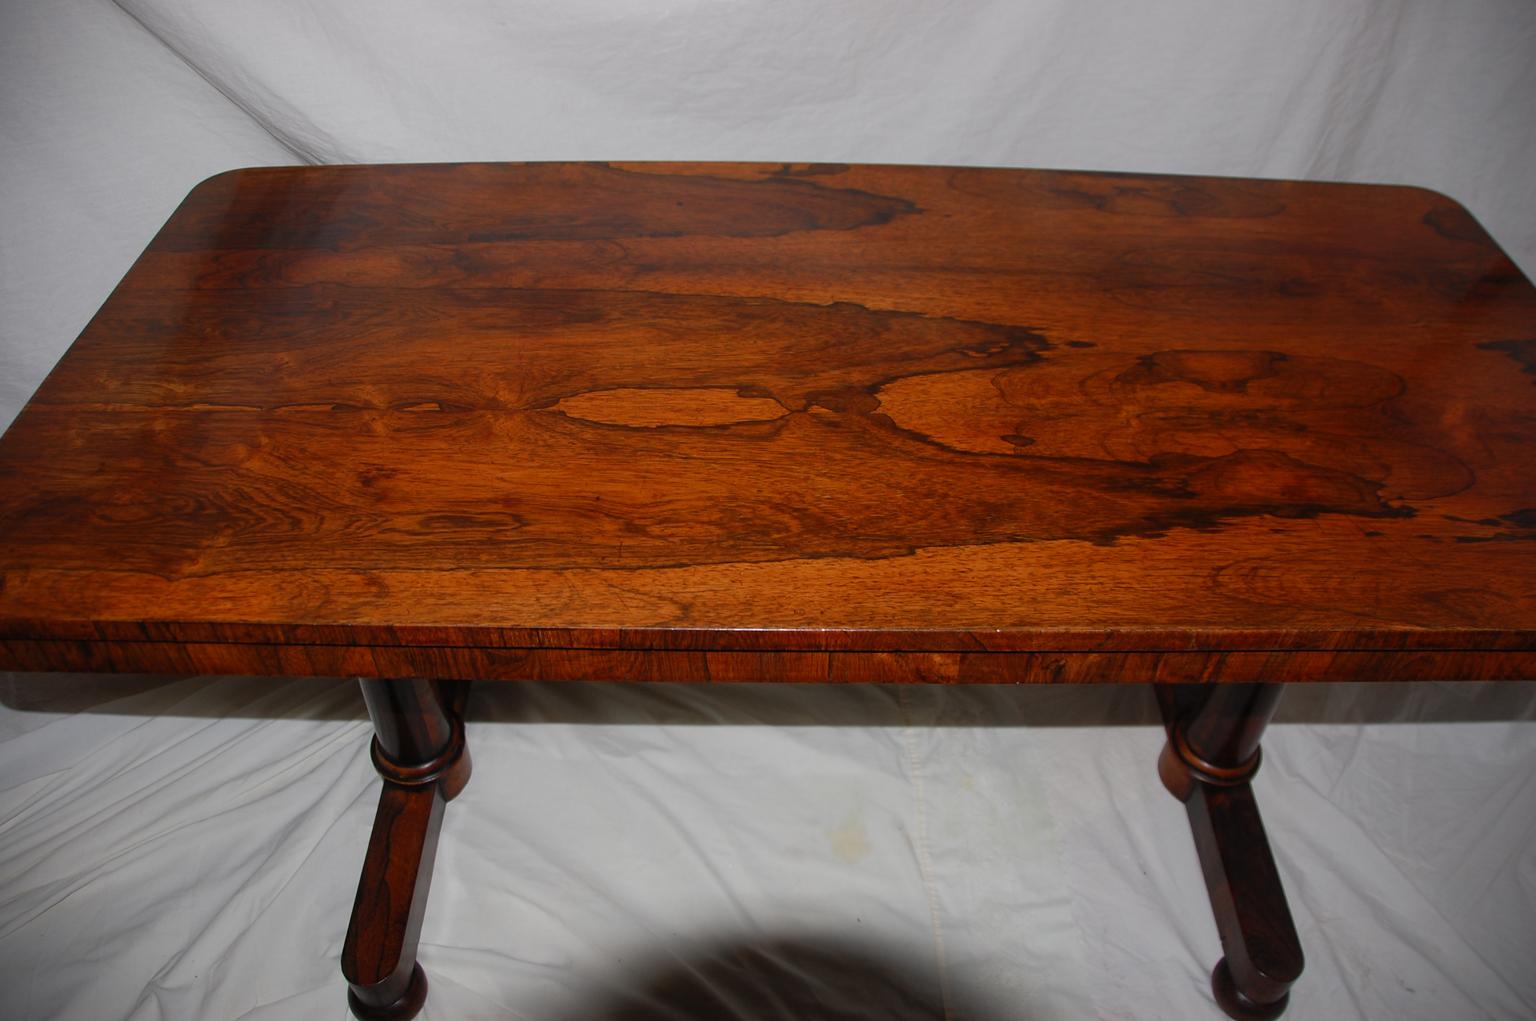 19th Century English William IV Period Rosewood Library Table with Pedestal Ends